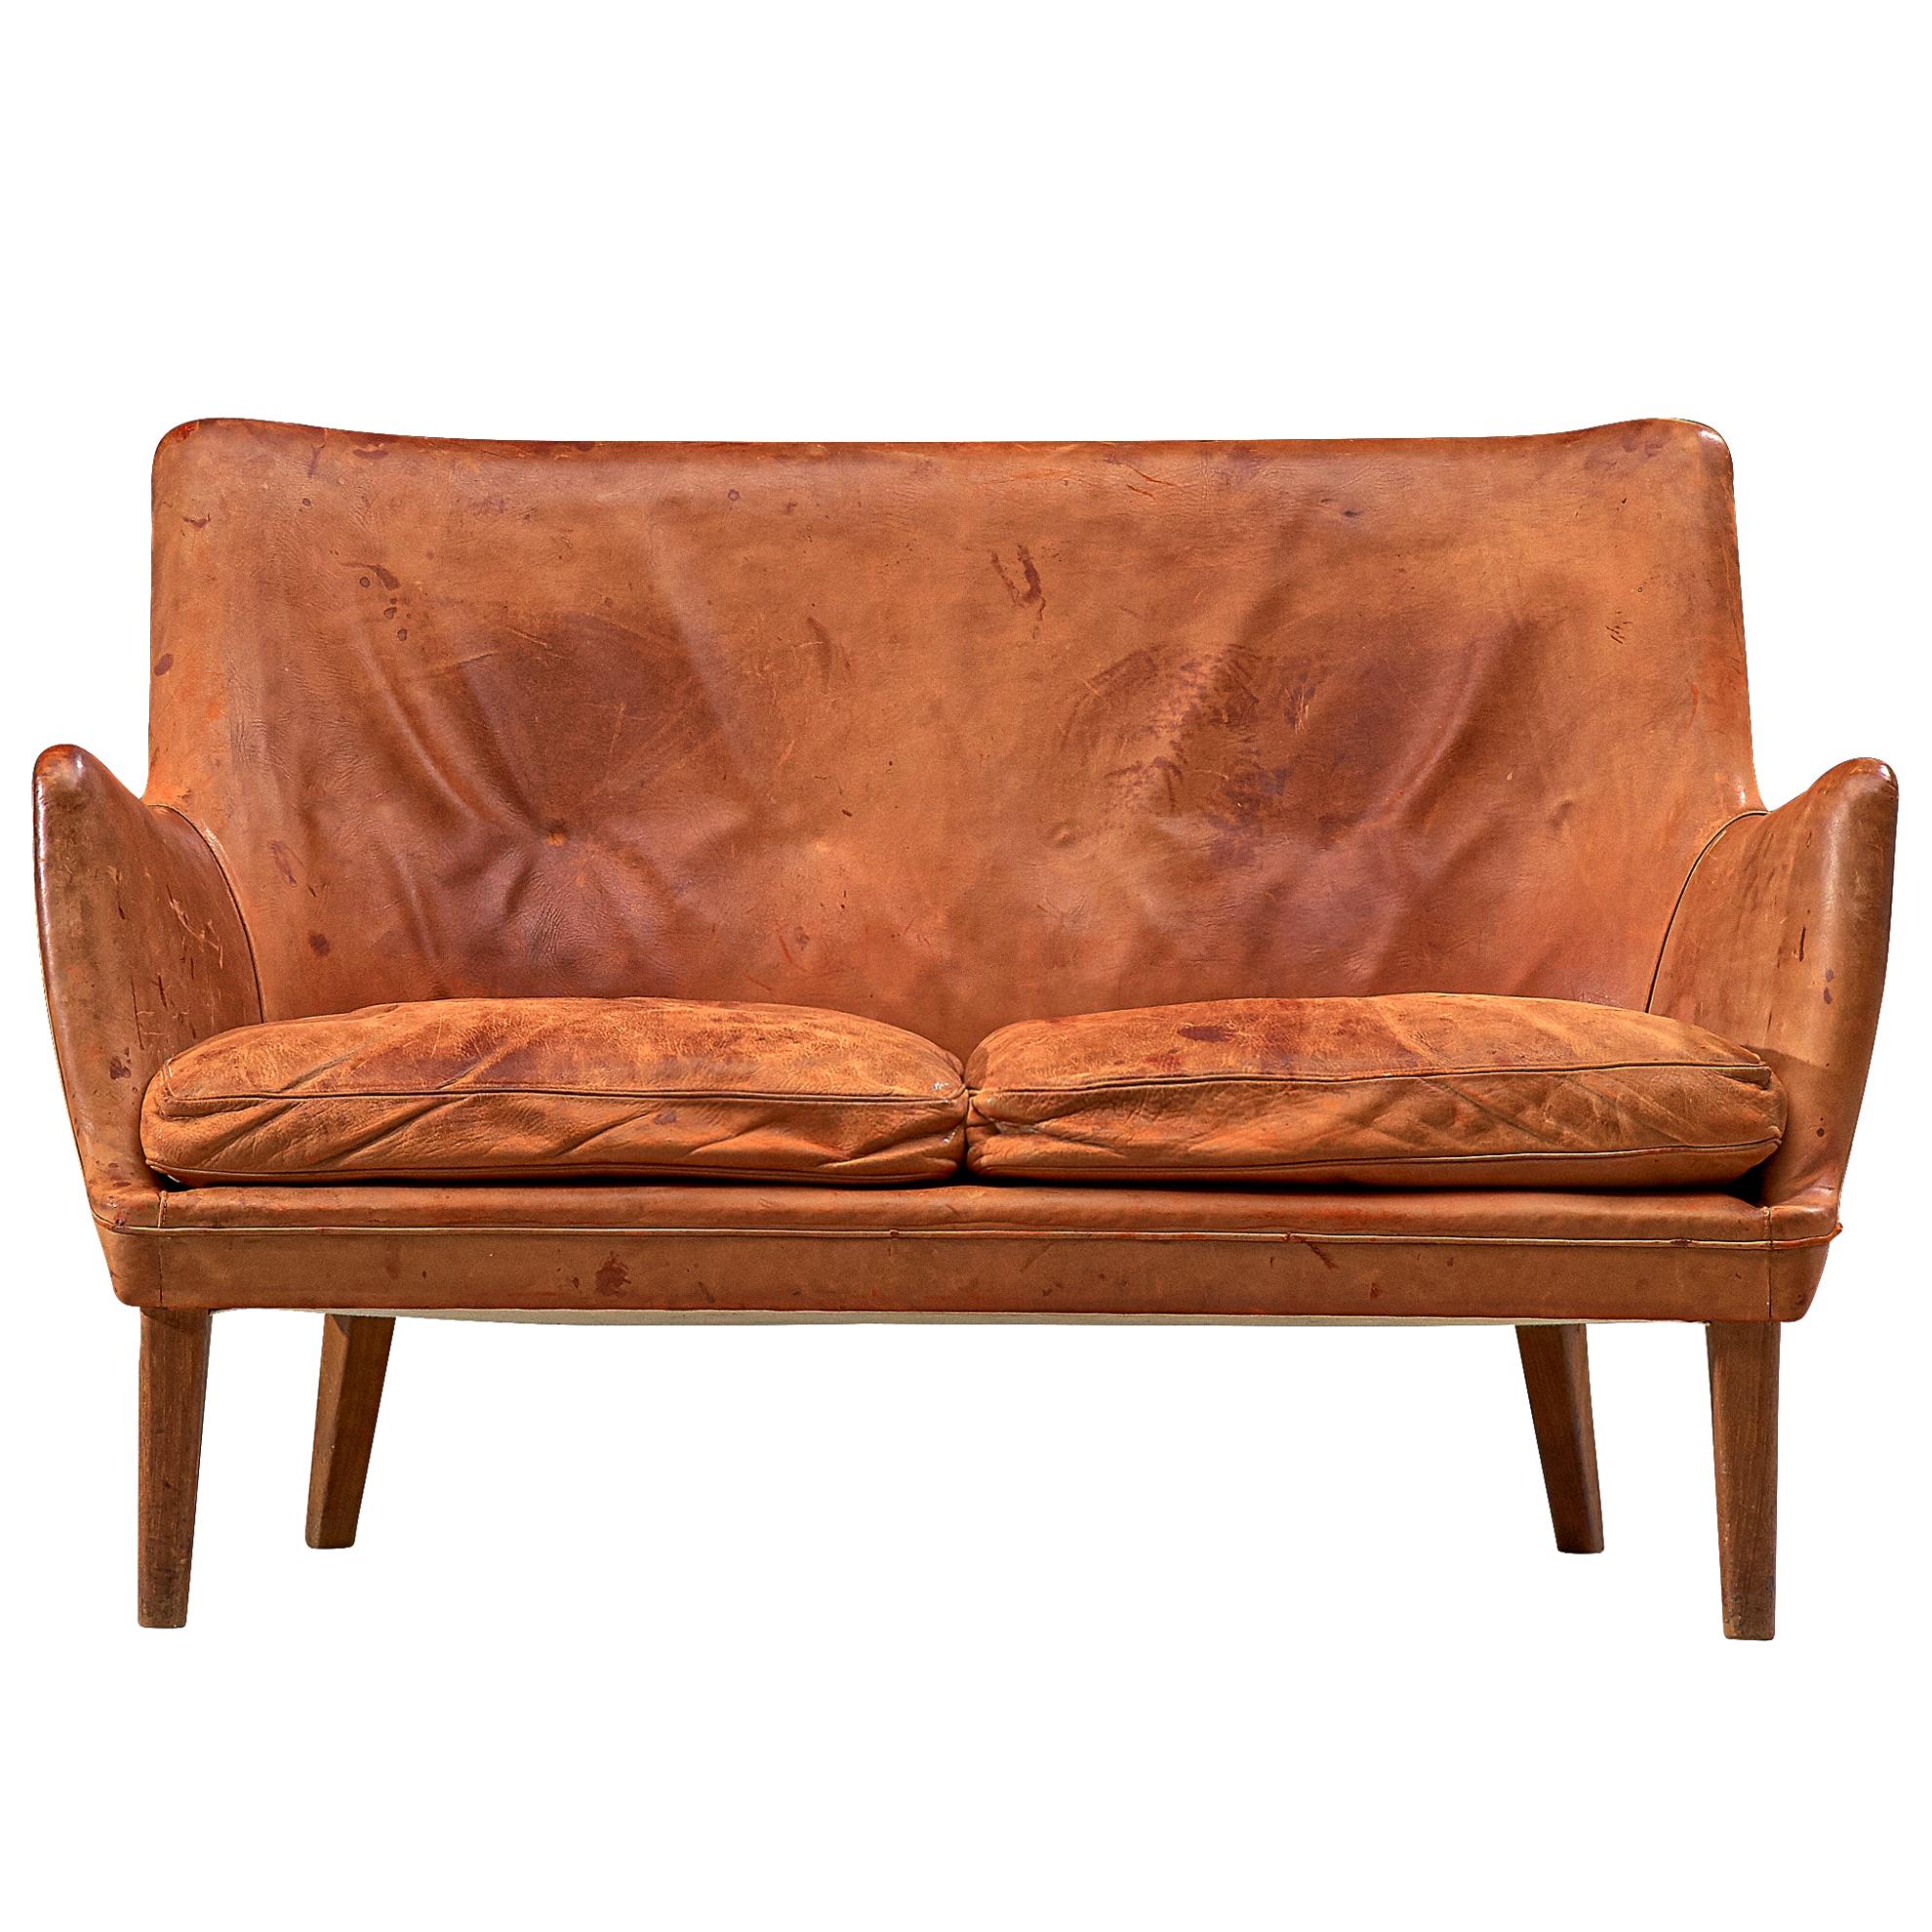 Arne Vodder Sofa in Patinated Cognac Leather